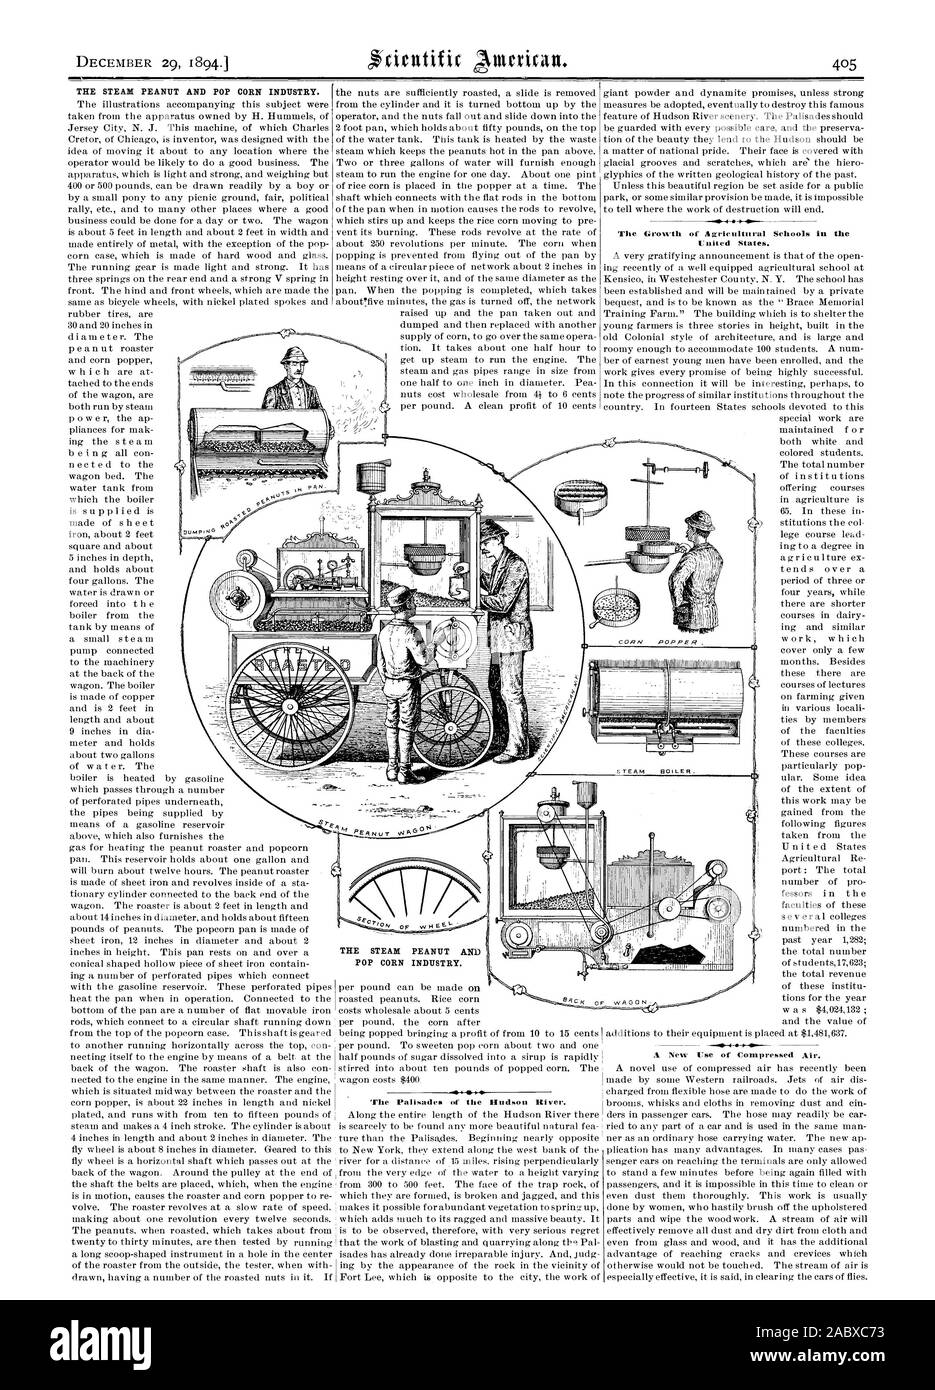 THE STEAM PEANUT AND POP CORN INDUSTRY. THE STEAM PEANUT AND POP CORN INDUSTRY. The Growth of Agricultural Schools in the United States. The Palisades of the Hudson Hirer./, scientific american, 1894-12-29 Stock Photo